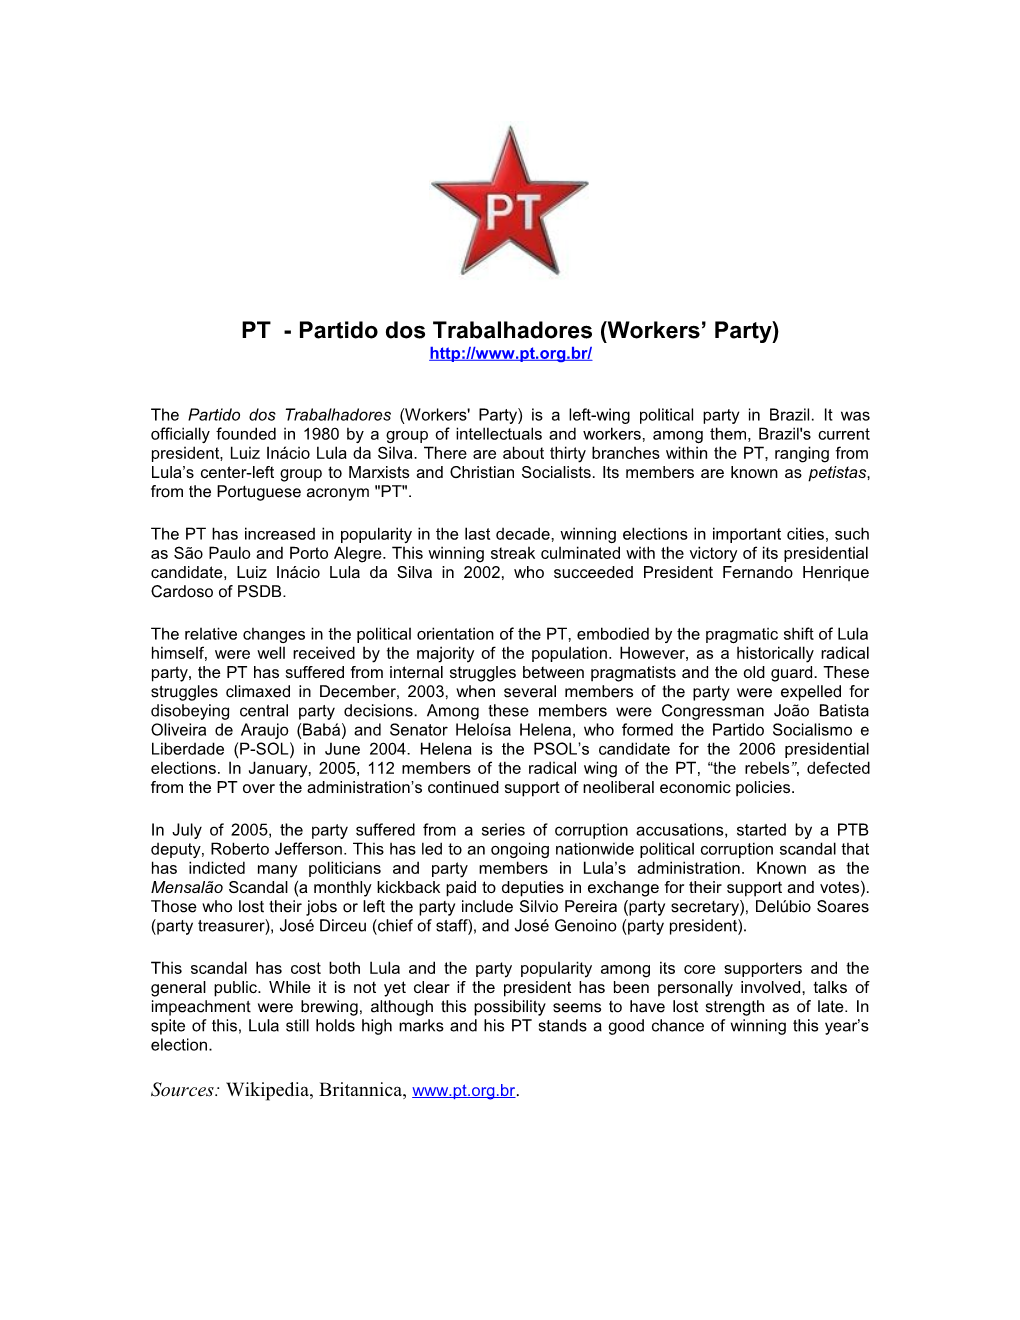 PT - Partido Dos Trabalhadores (Workers Party)